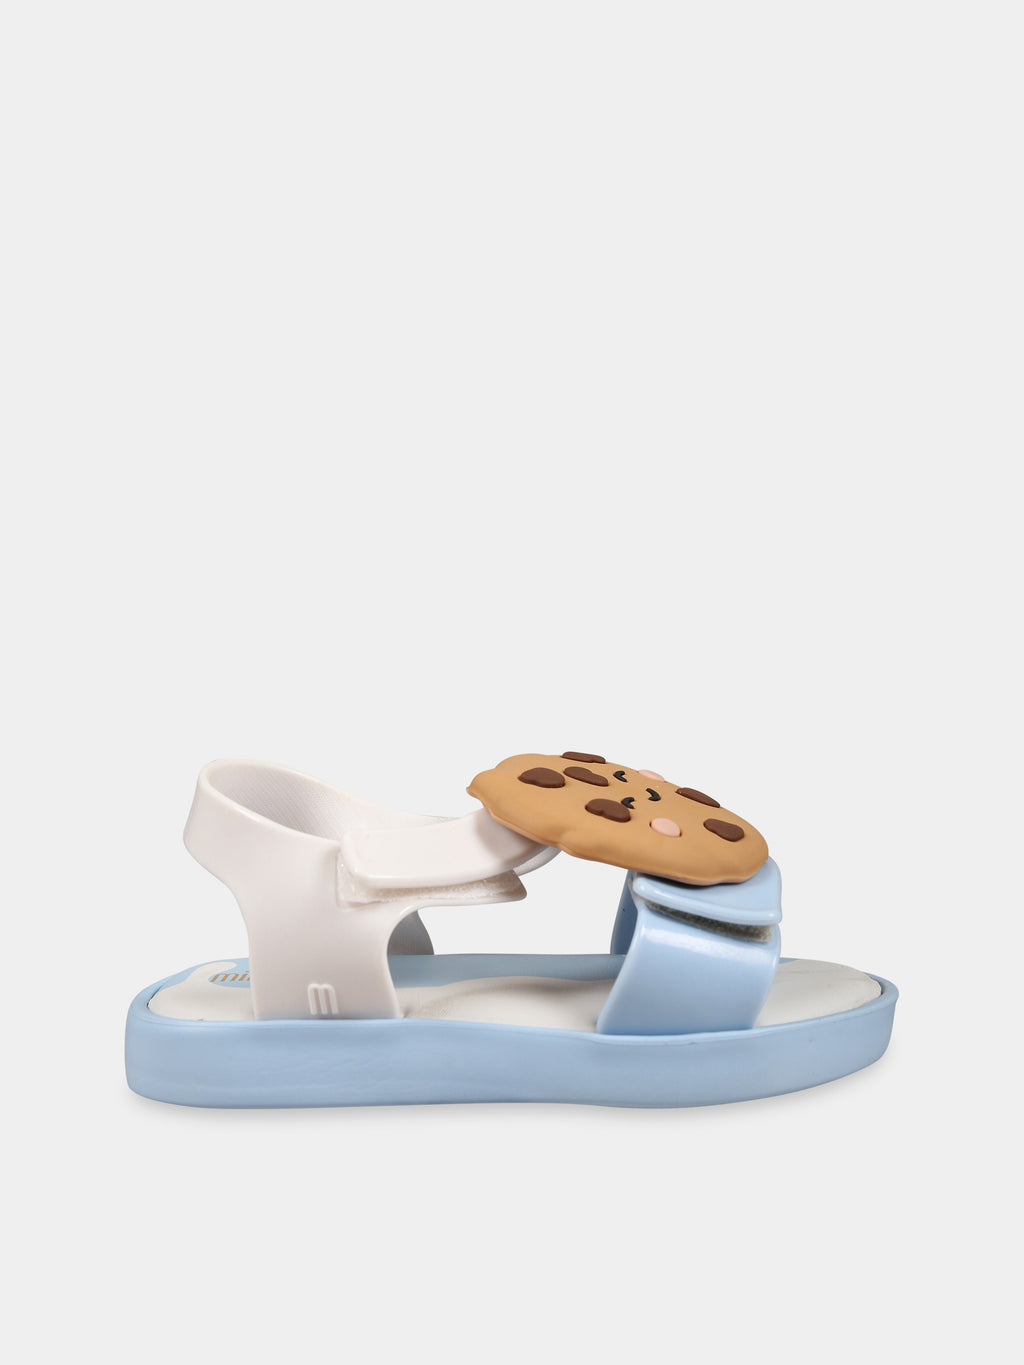 Multicolor sandals for kids with cookie et logo